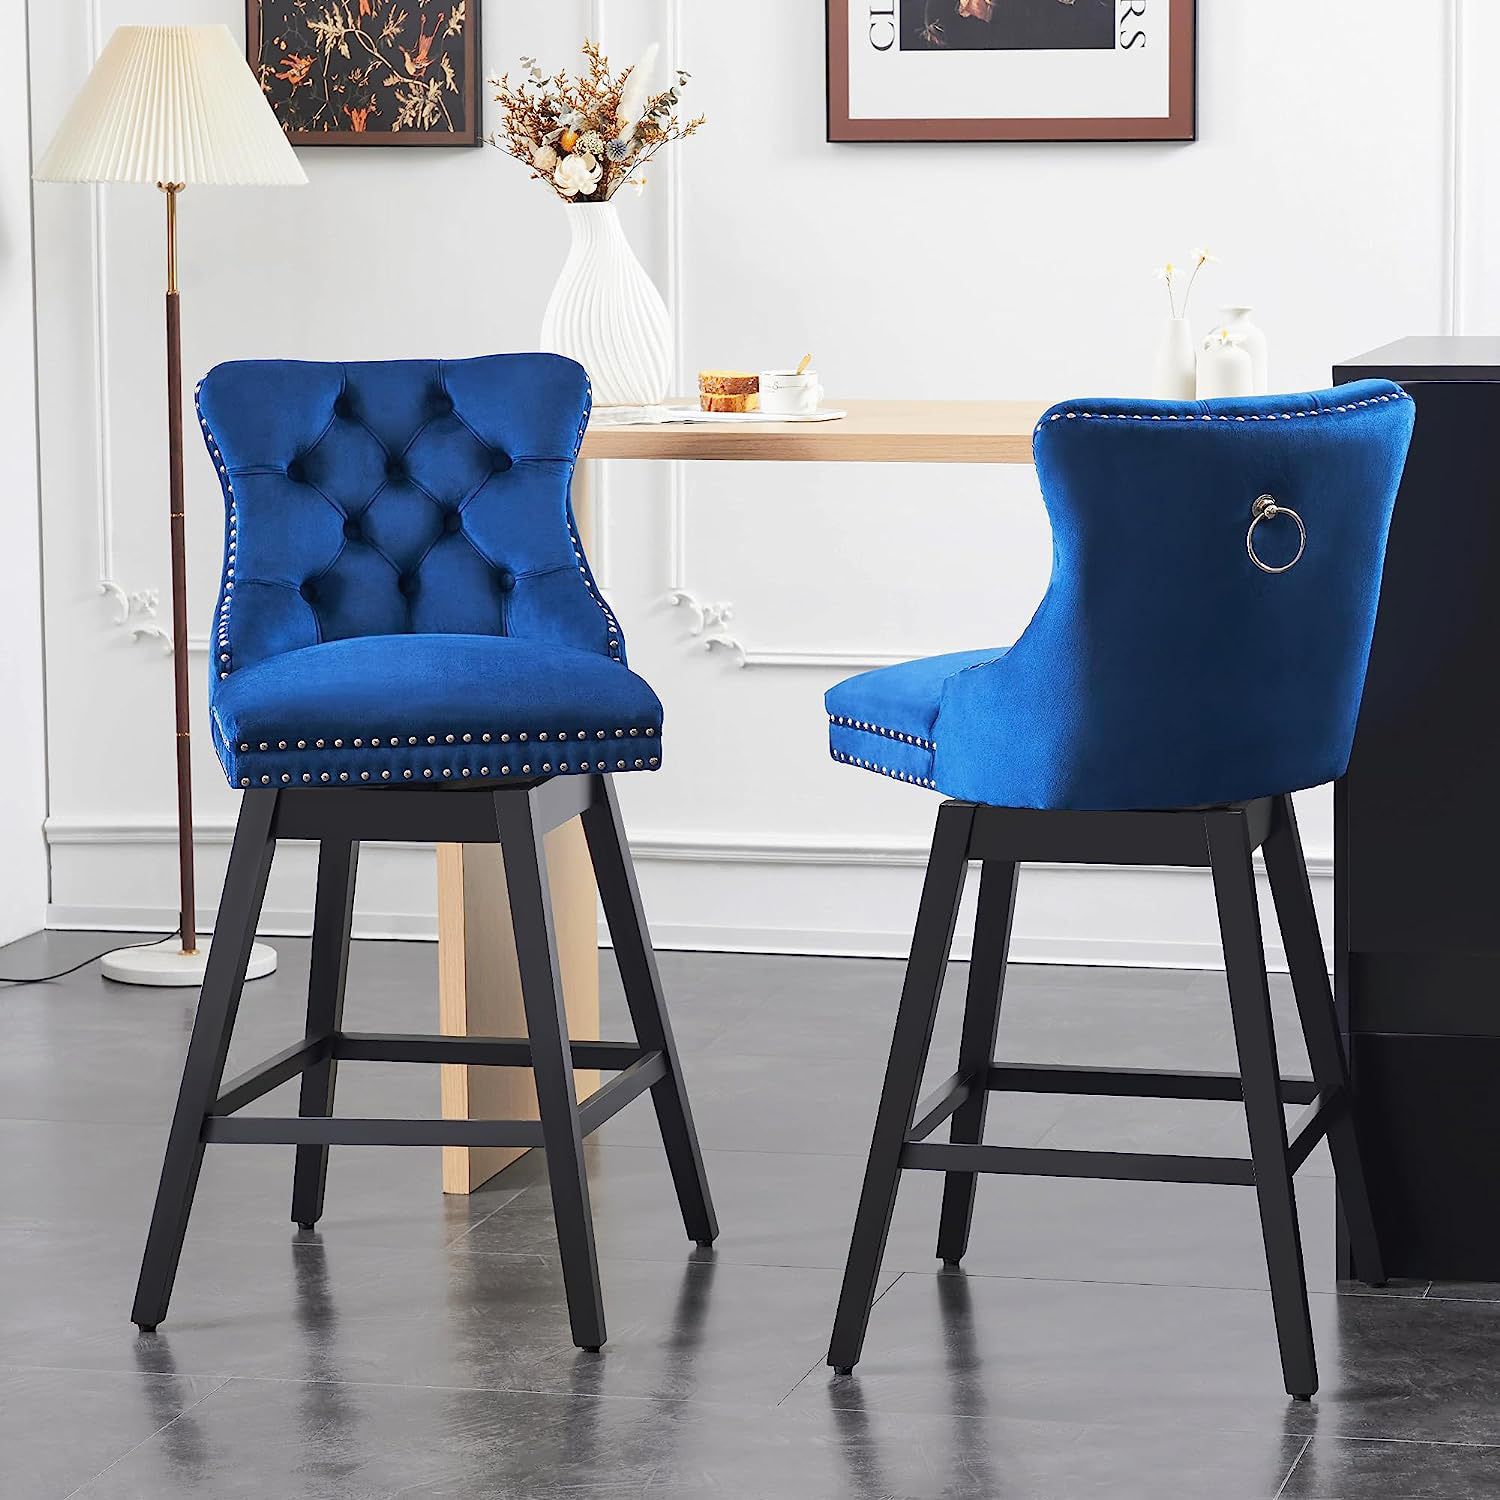 Counter Height Bar Stools, 360 Free Swivel Bar Stools with Backs, Premium Velvet Fabric Upholstered Counter Height Chairs, Solid Wood Legs, (Blue, 26